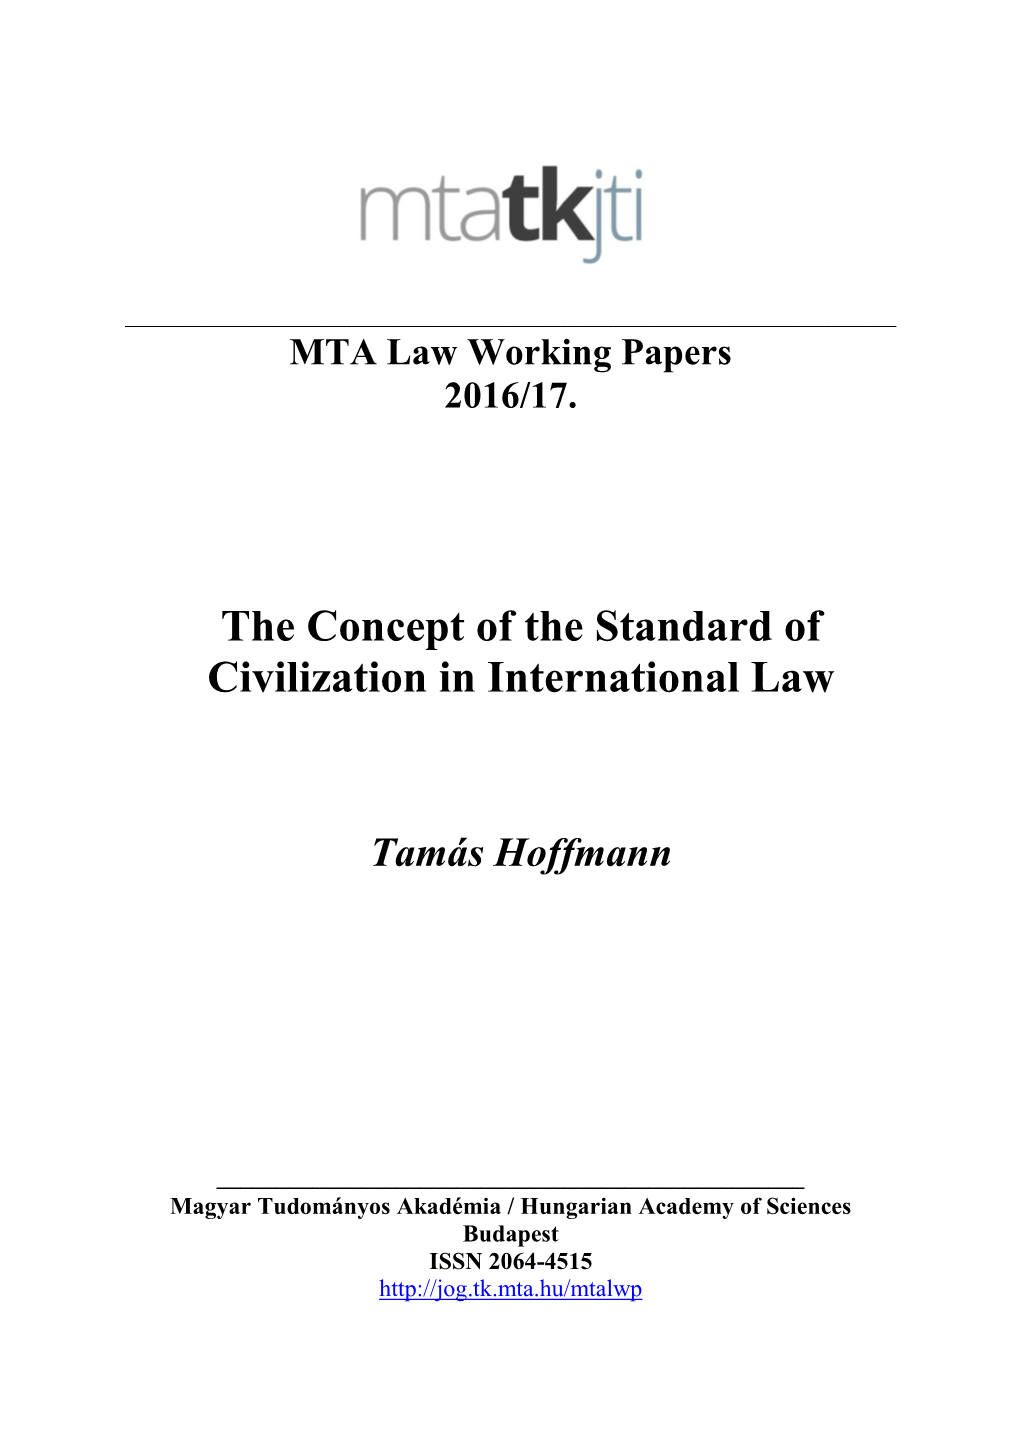 The Concept of the Standard of Civilization in International Law